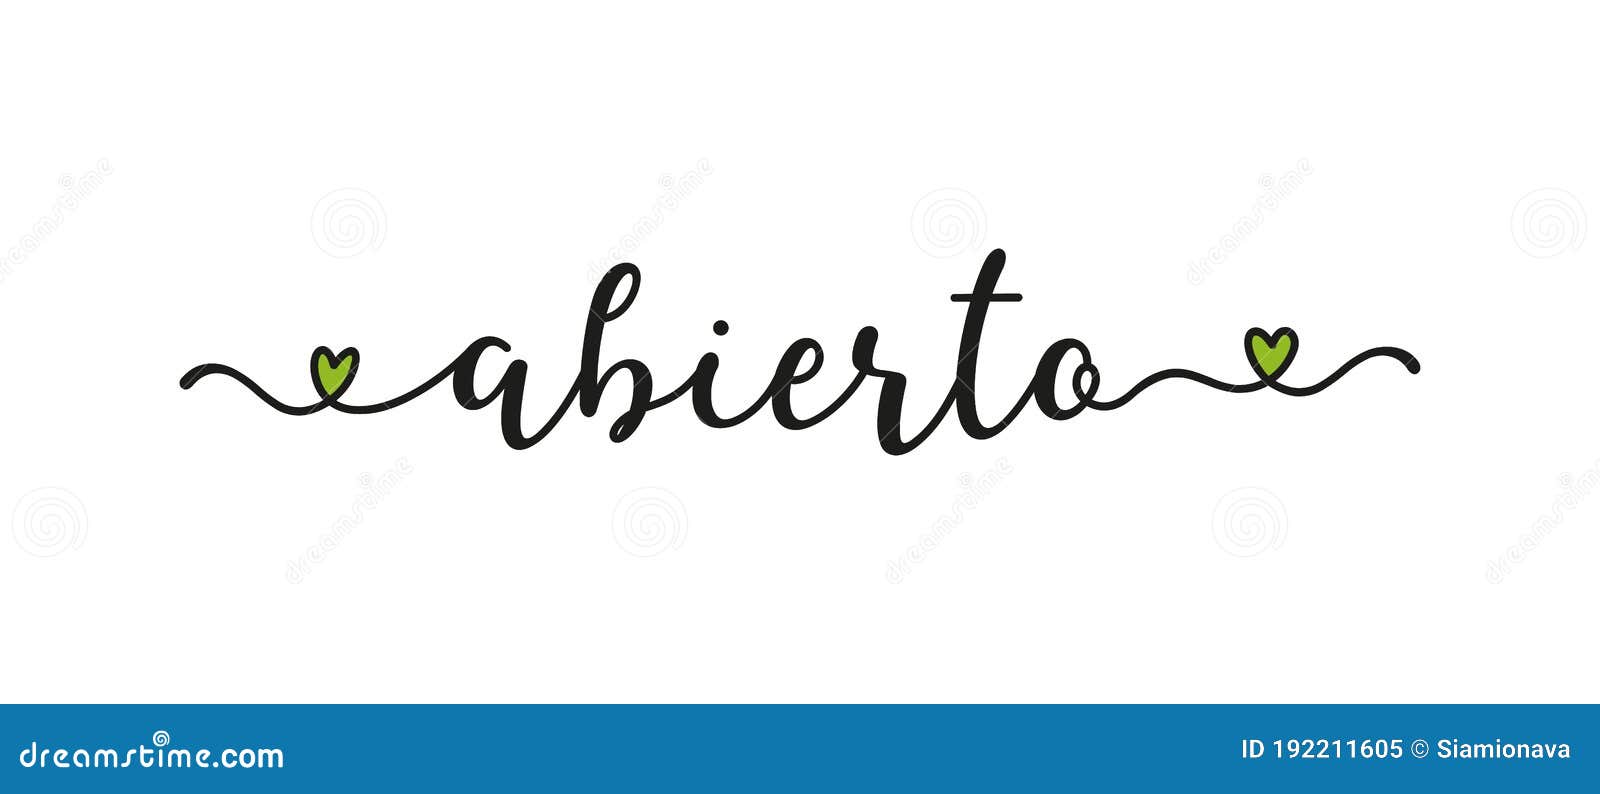 hand sketched abierto word in spanish as ad, web banner. translated open. lettering for banner, header, advertisement